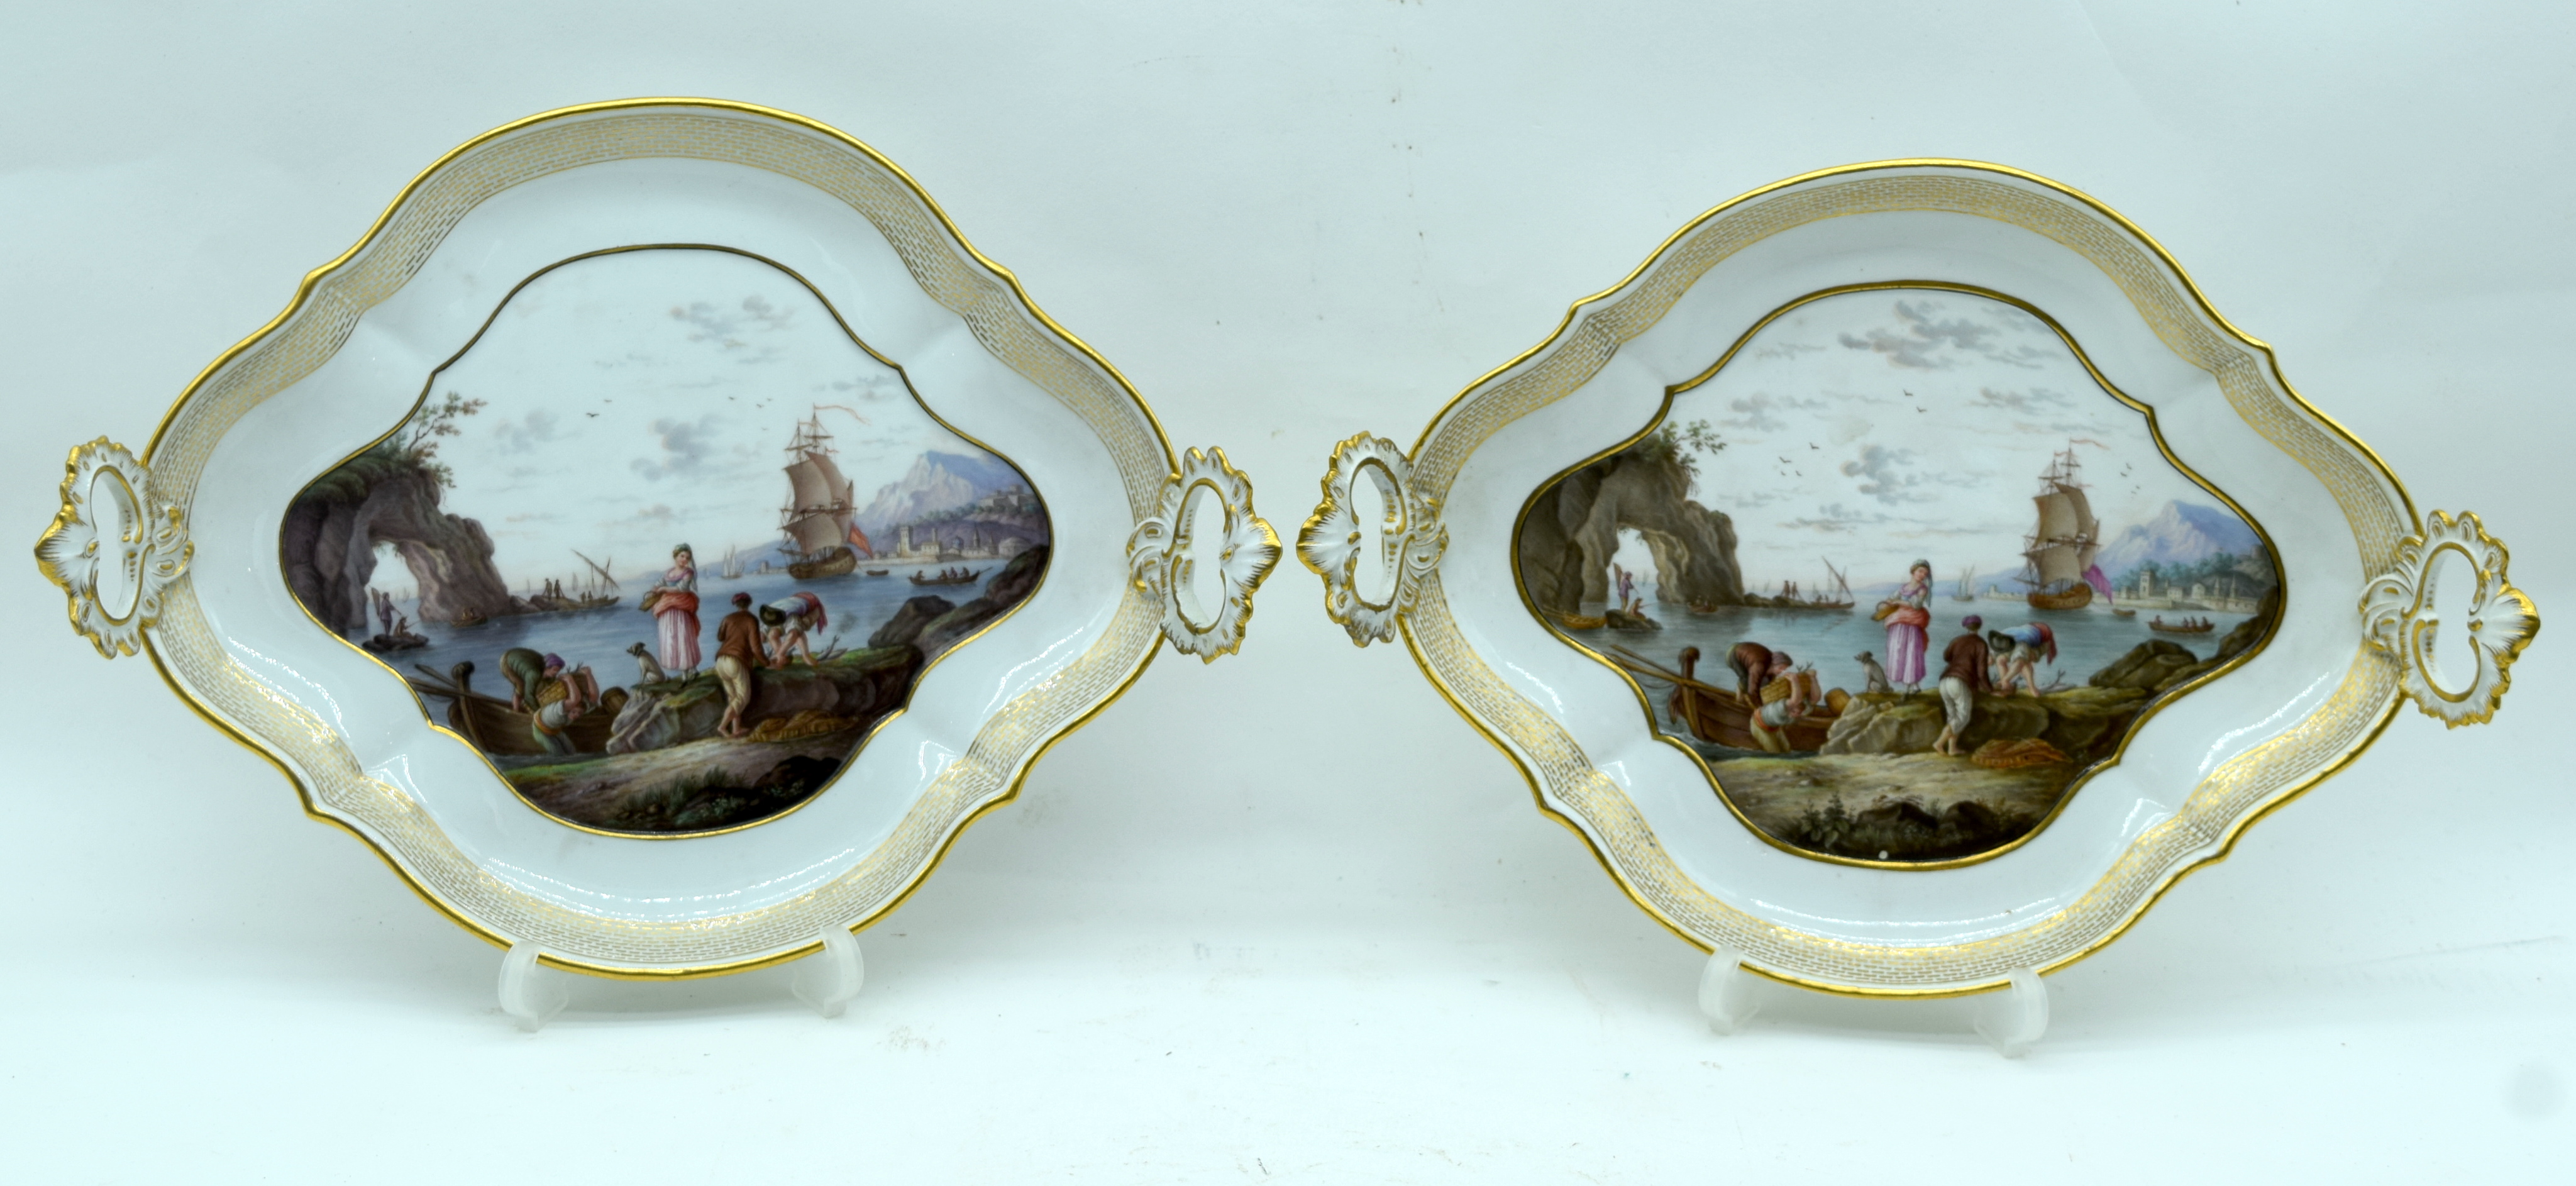 A FINE PAIR OF 18TH/19TH CENTURY MEISSEN TWIN HANDLED PORCELAIN DISHES painted with coastal views. 2